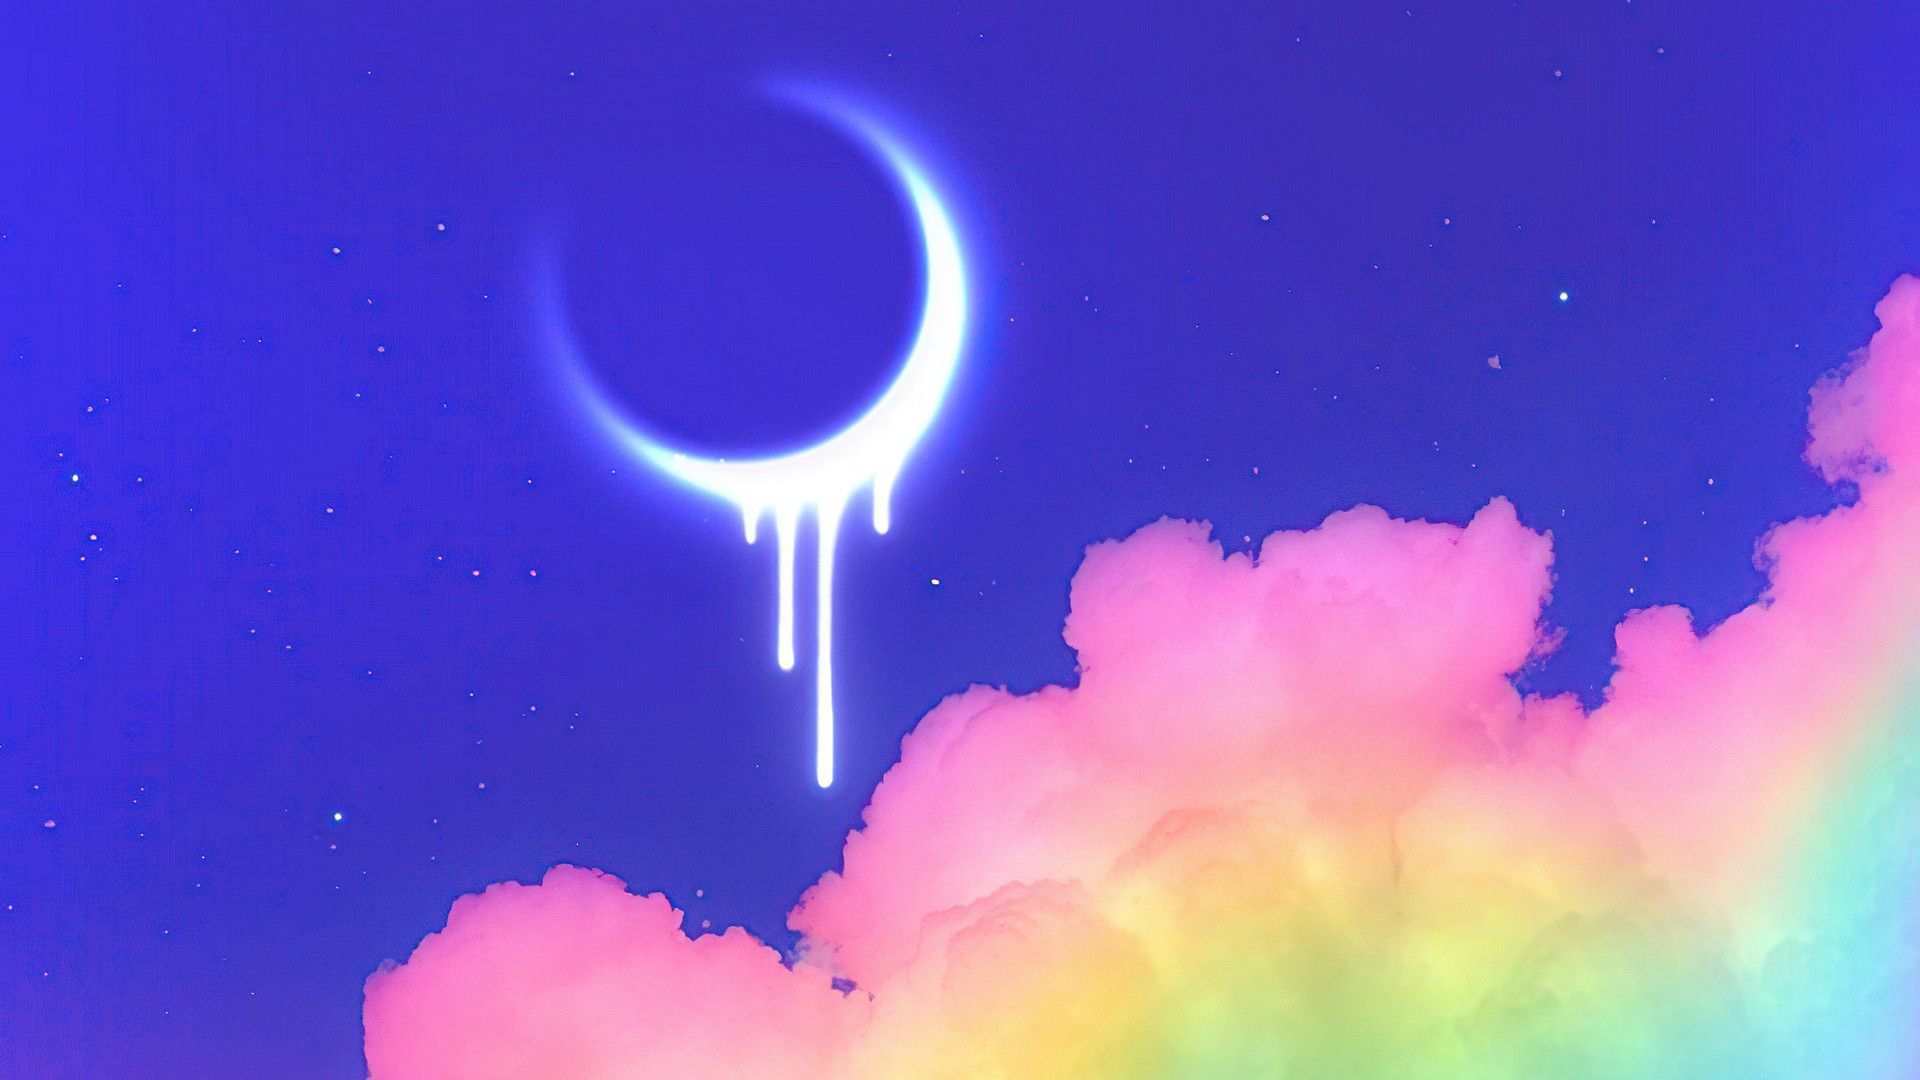 A rainbow colored sky with clouds and the moon - Moon